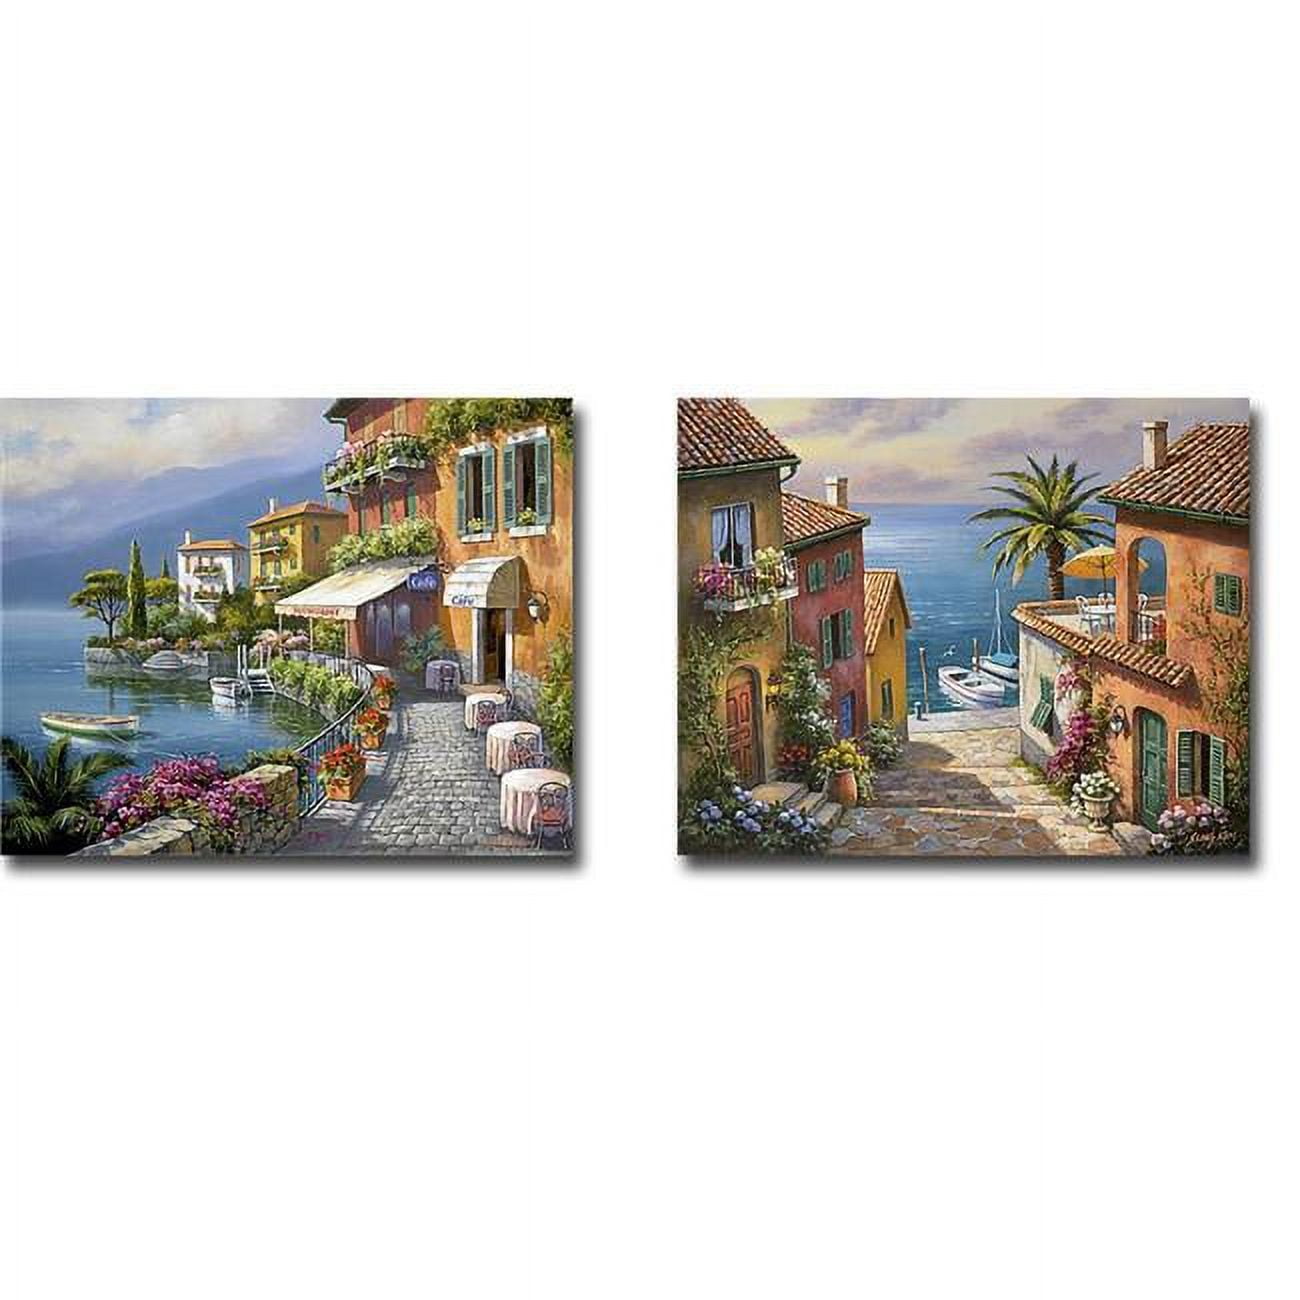 32406754ig Seaside Bistro Cafe & The Villas Private Dock By Sung Kim 2-piece Premium Oversize Gallery Wrapped Canvas Giclee Art Set - 32 X 40 In.